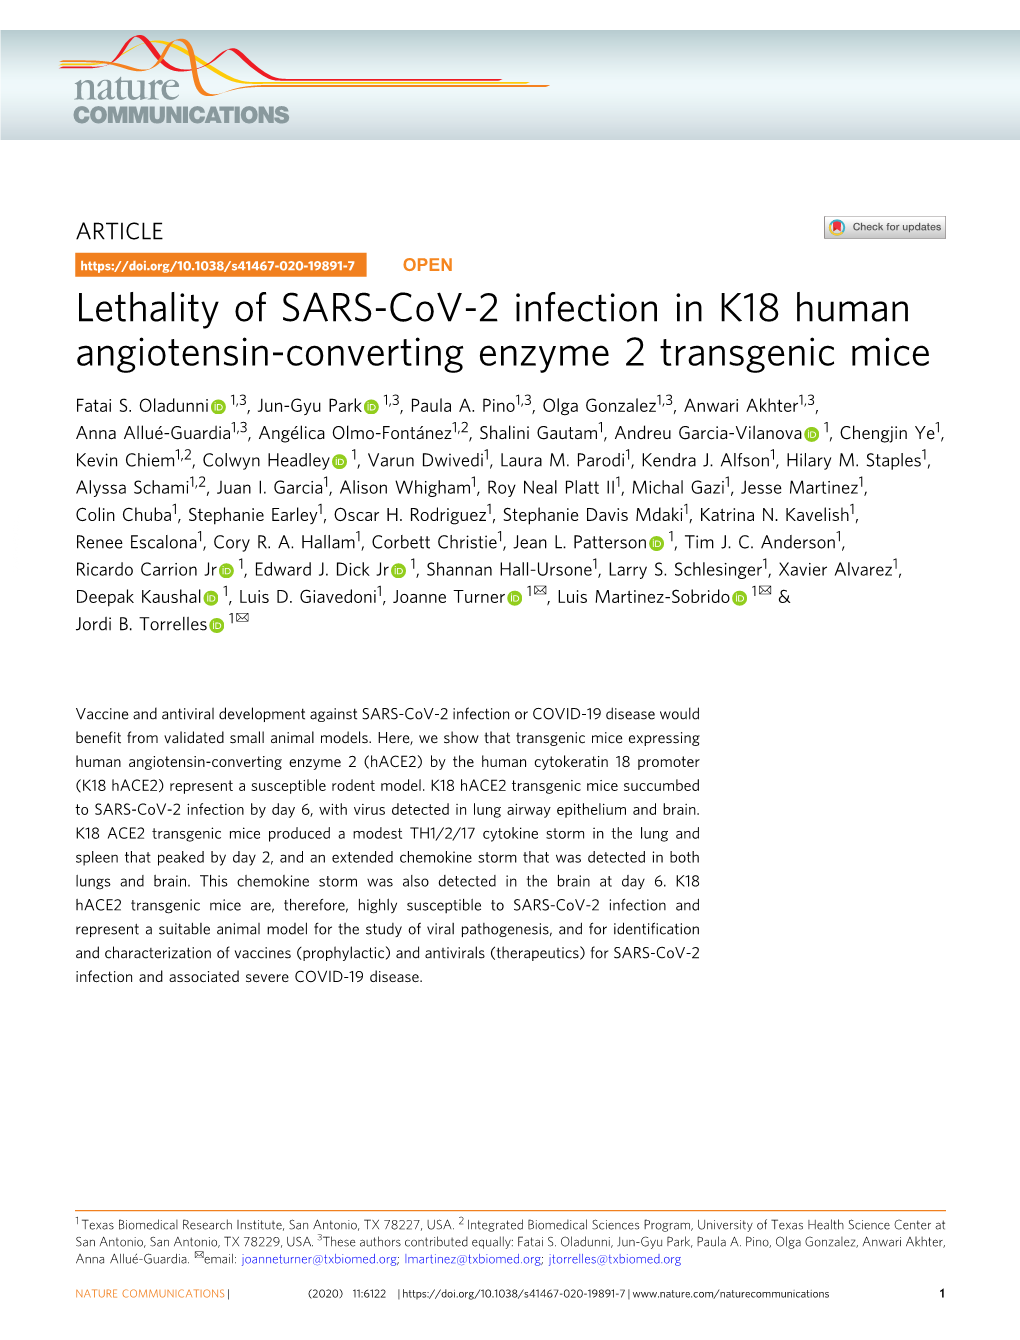 Lethality of SARS-Cov-2 Infection in K18 Human Angiotensin-Converting Enzyme 2 Transgenic Mice